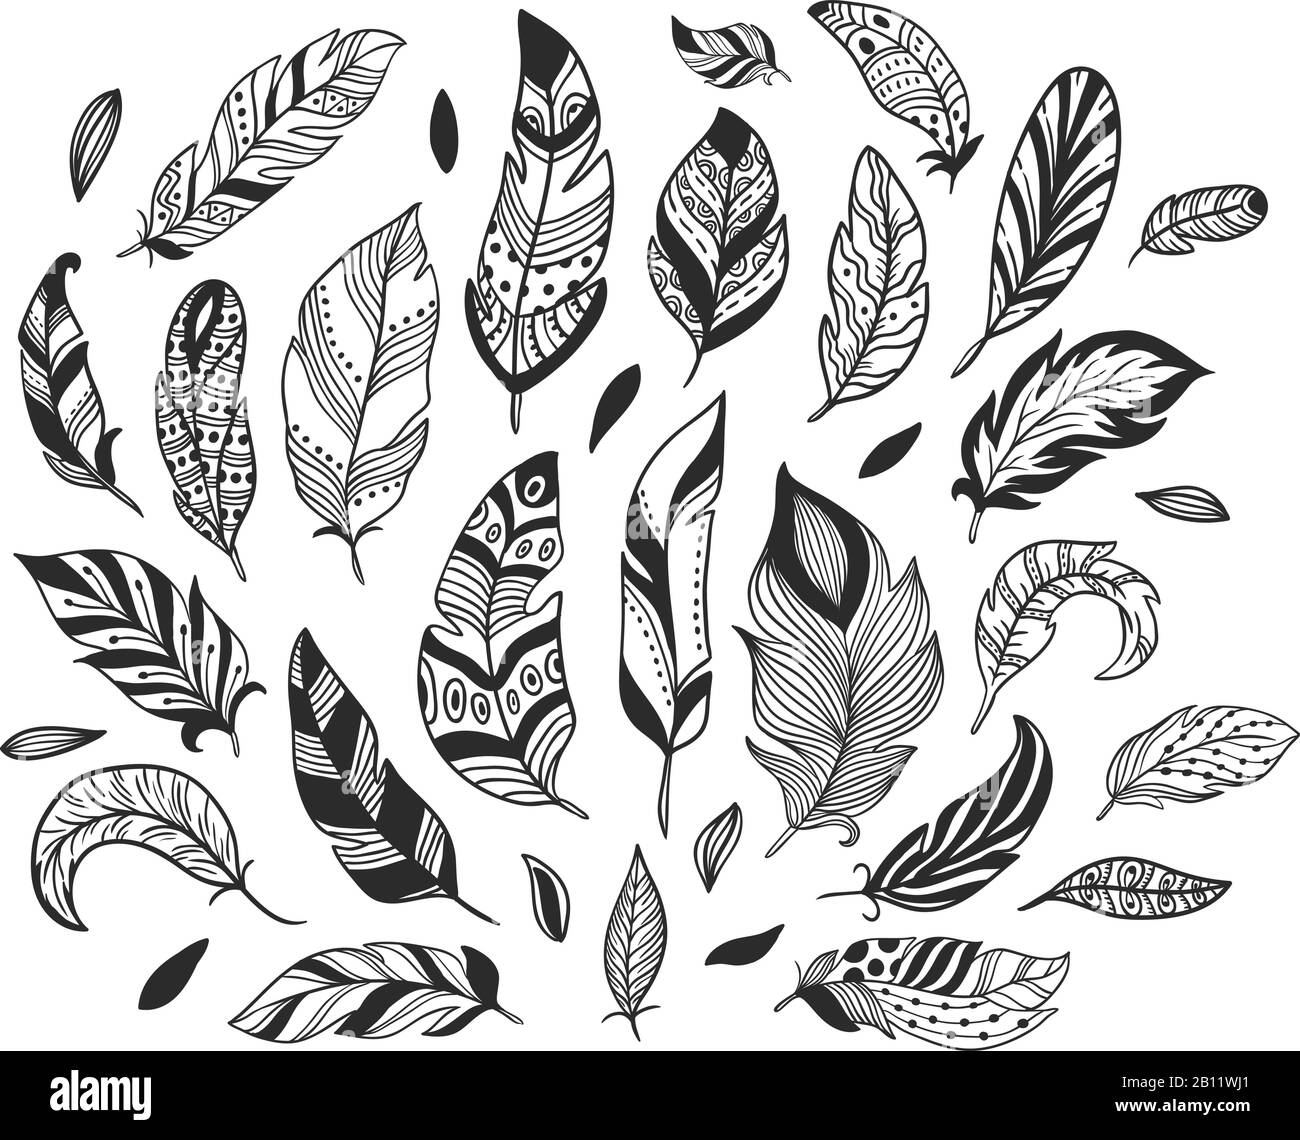 Hand drawn pencil sketch with stroke. Black doodle on white background.  Vector illustration Stock Vector Image & Art - Alamy